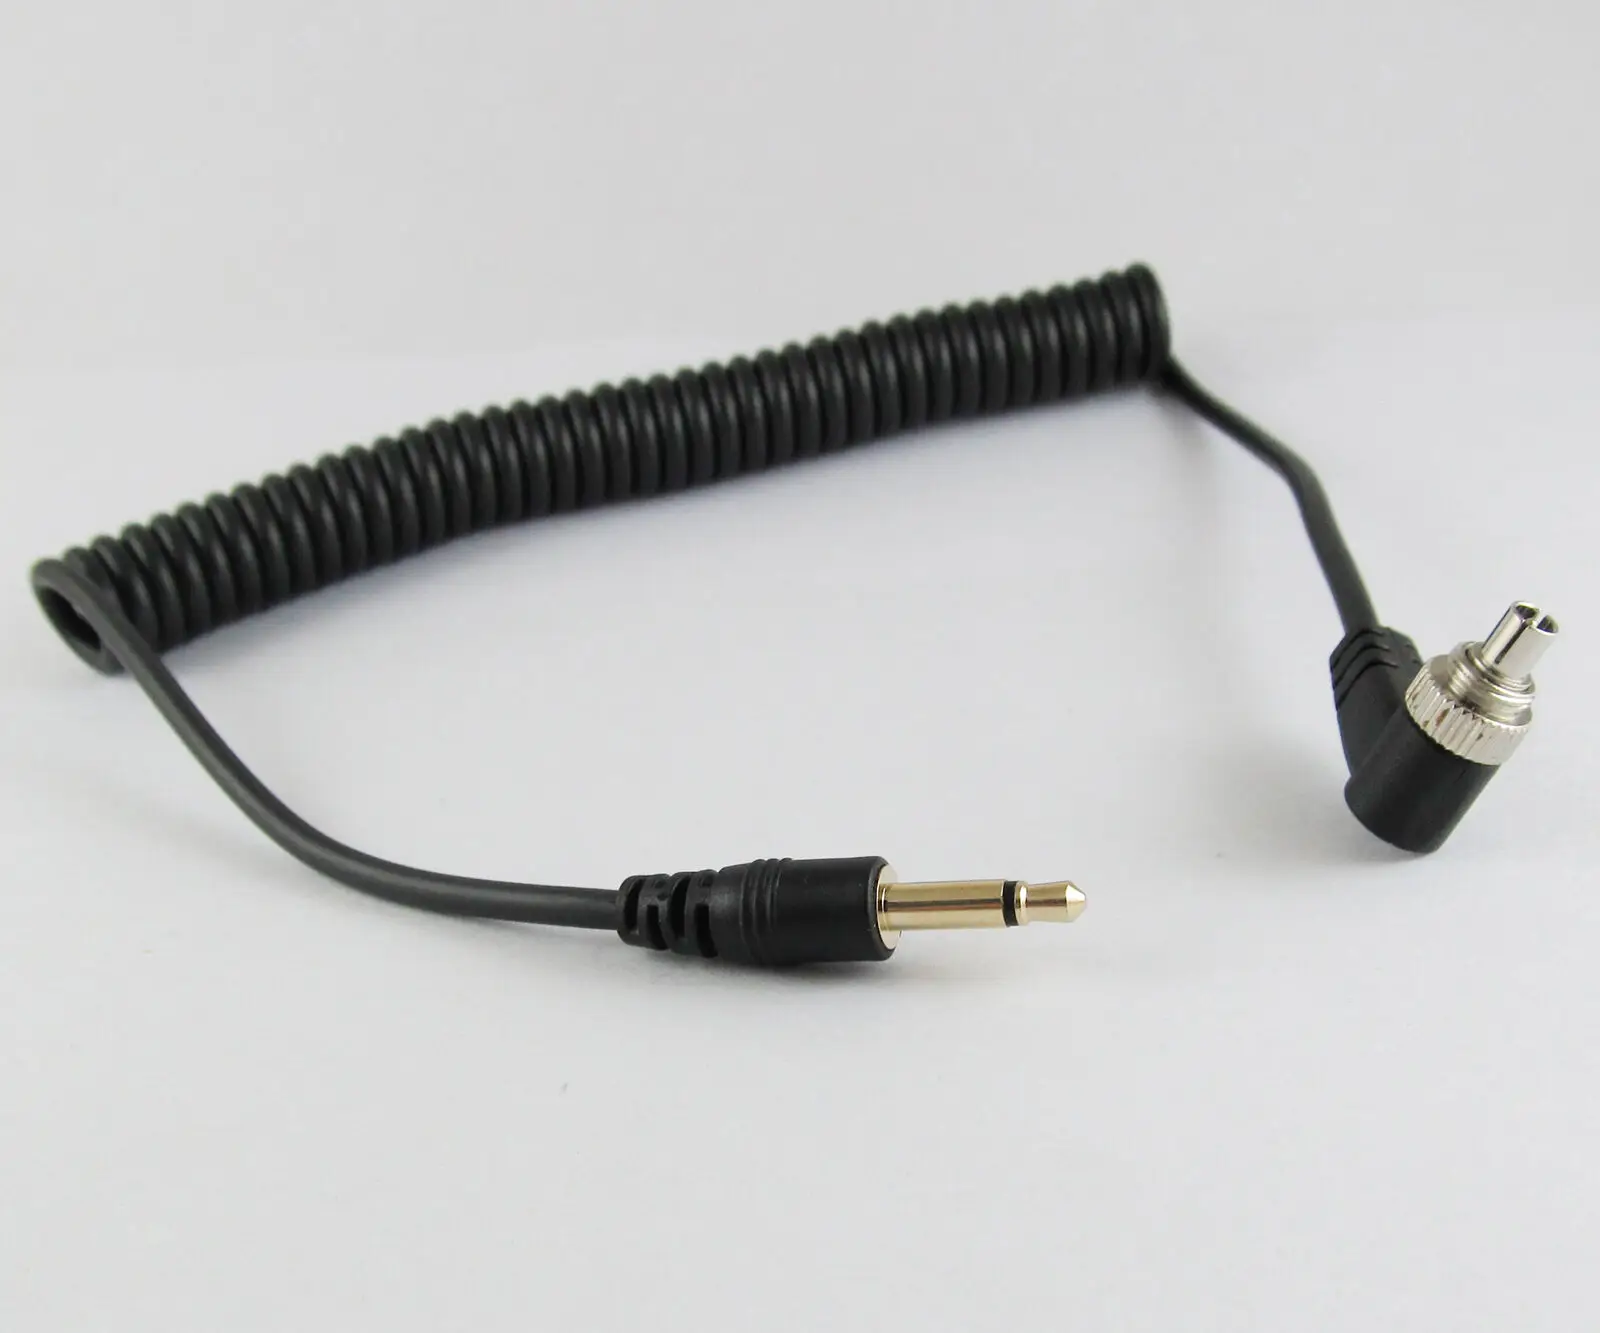 

1pc 1ft / 30CM Gold Plated 3.5mm Mono Male Plug to Angle Male Flash PC Sync Cord Retractable Cable